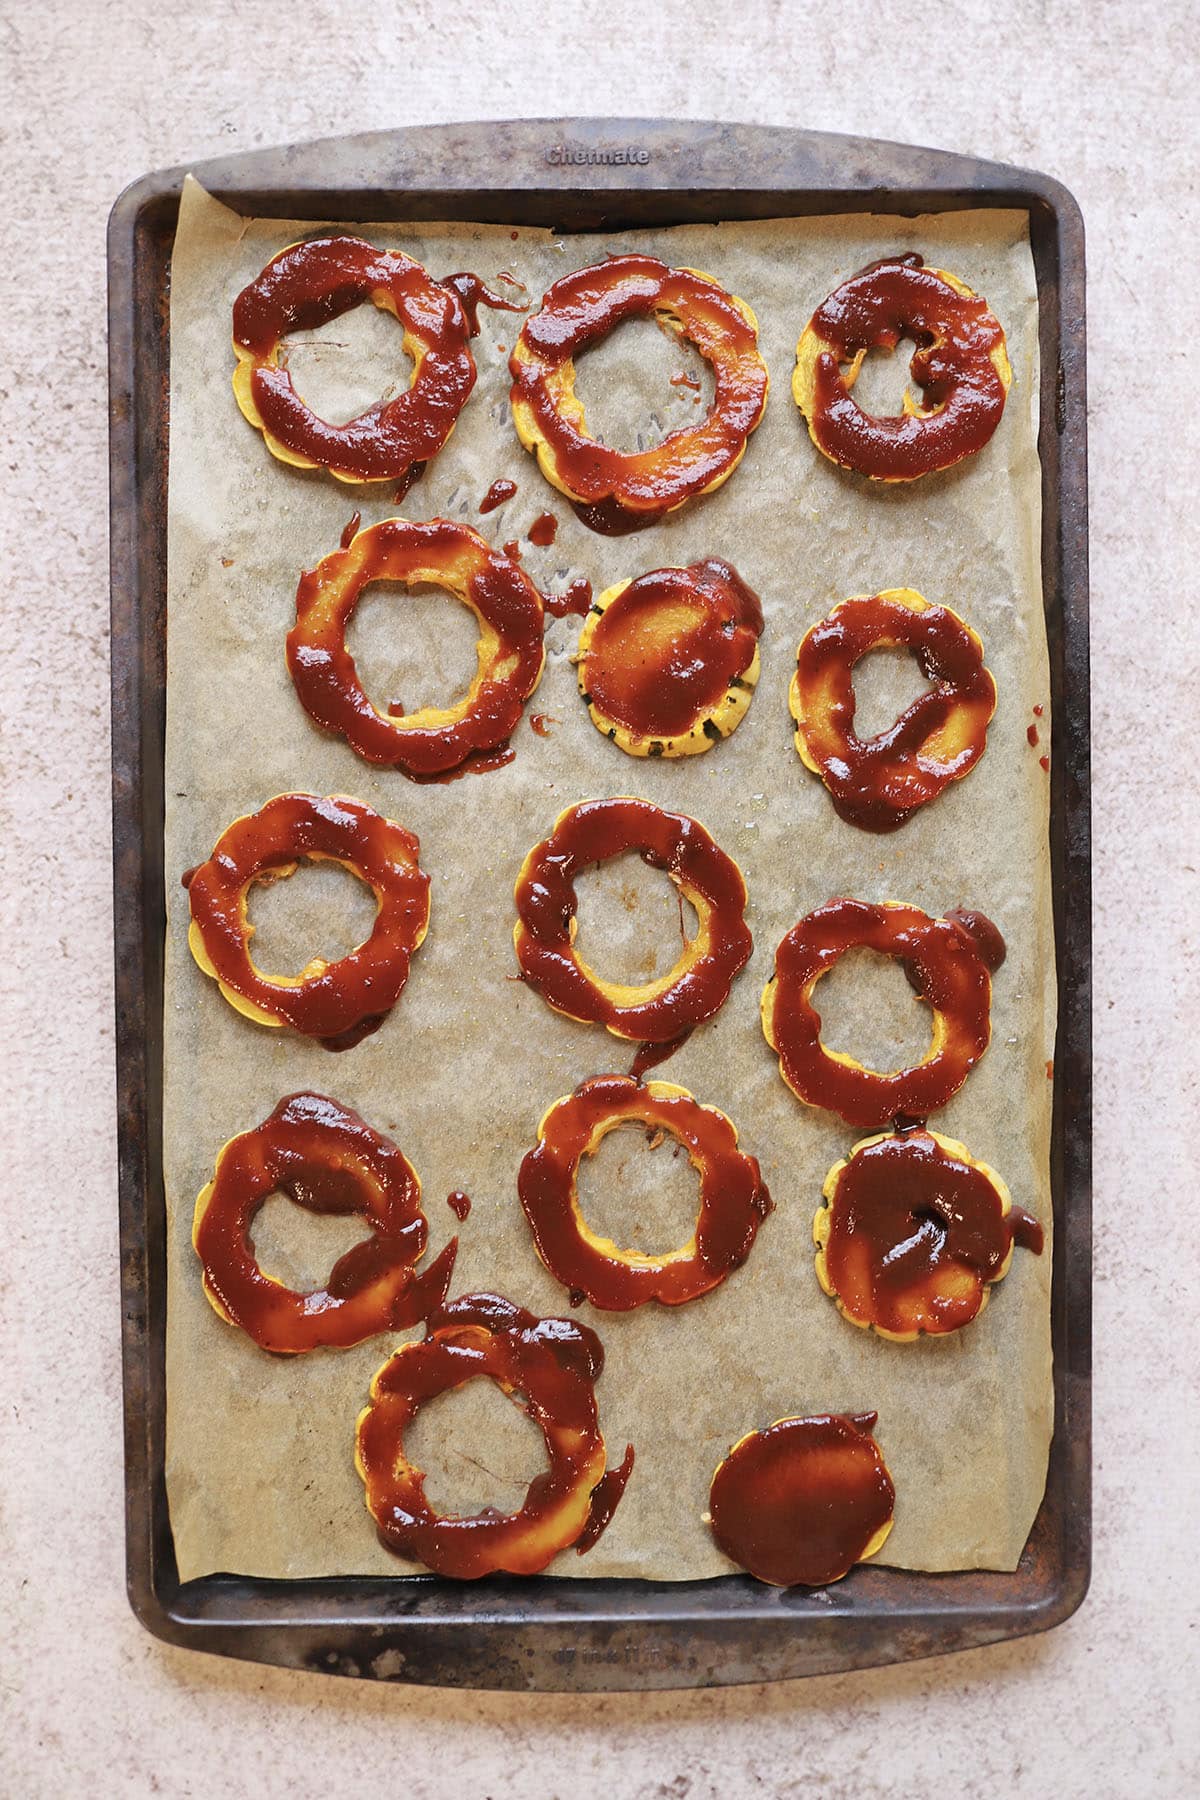 Delicata squash rounds with barbecue sauce on baking sheet.